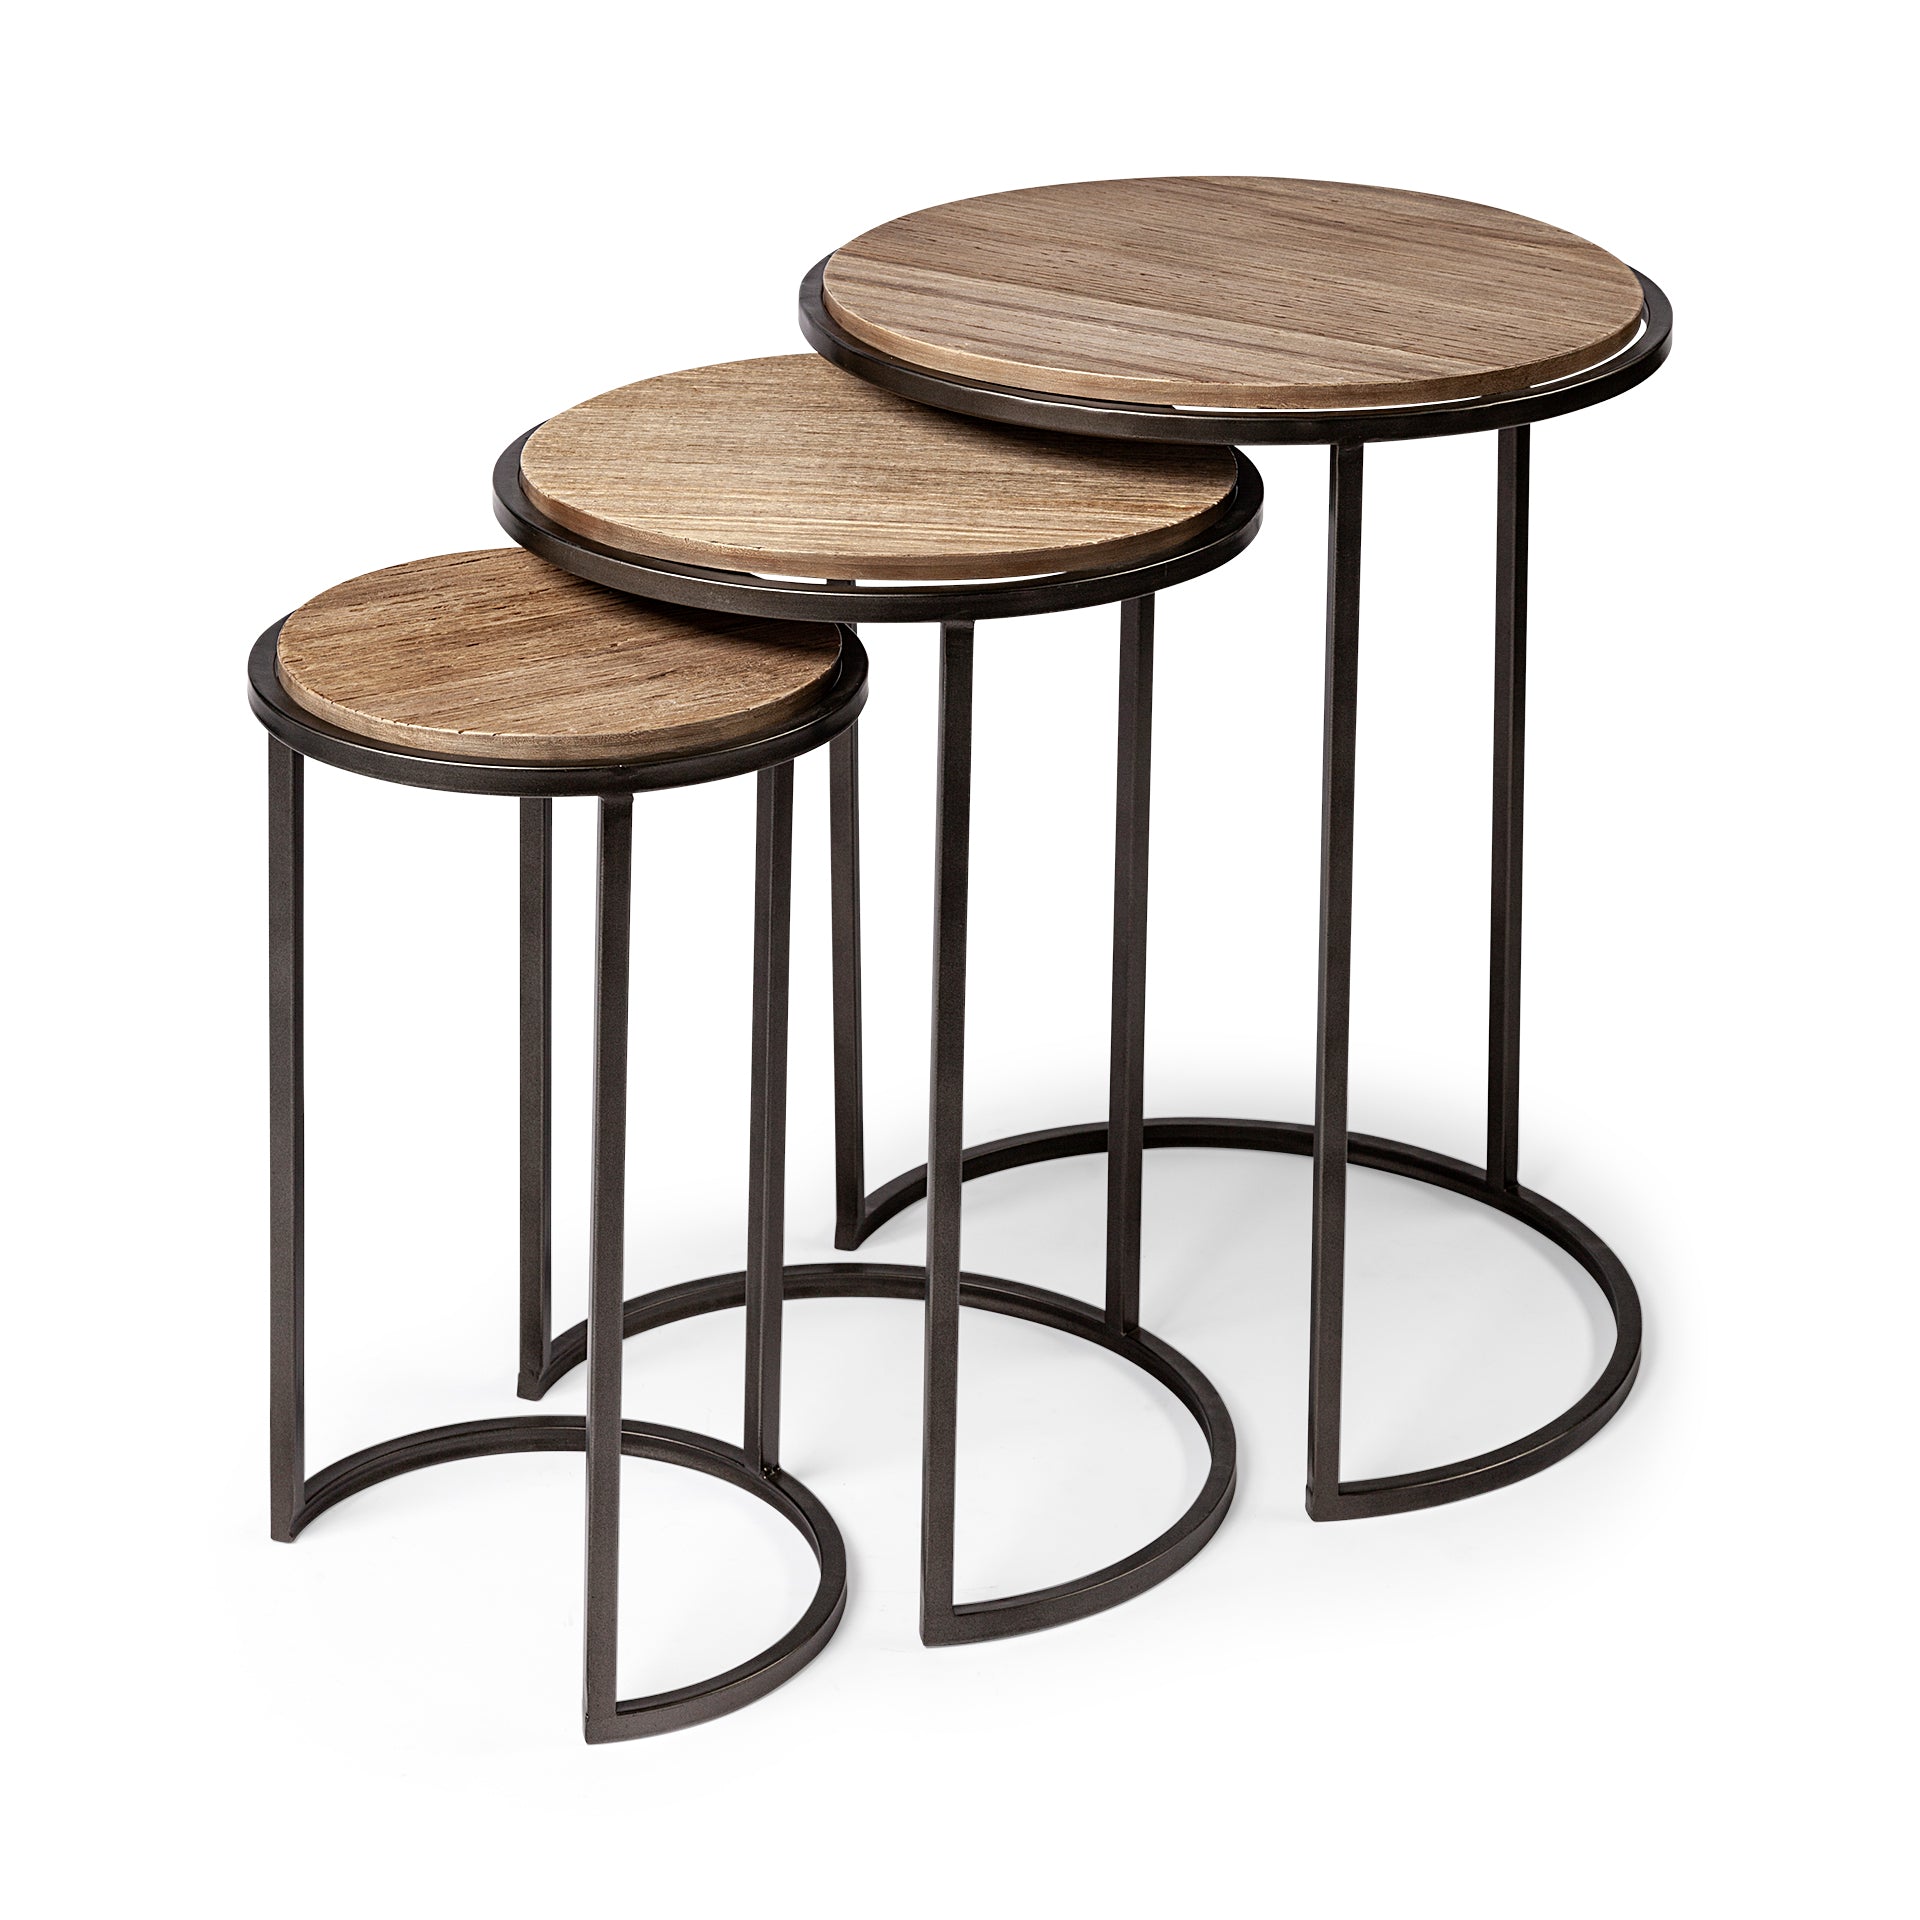 Glory Accent Tables